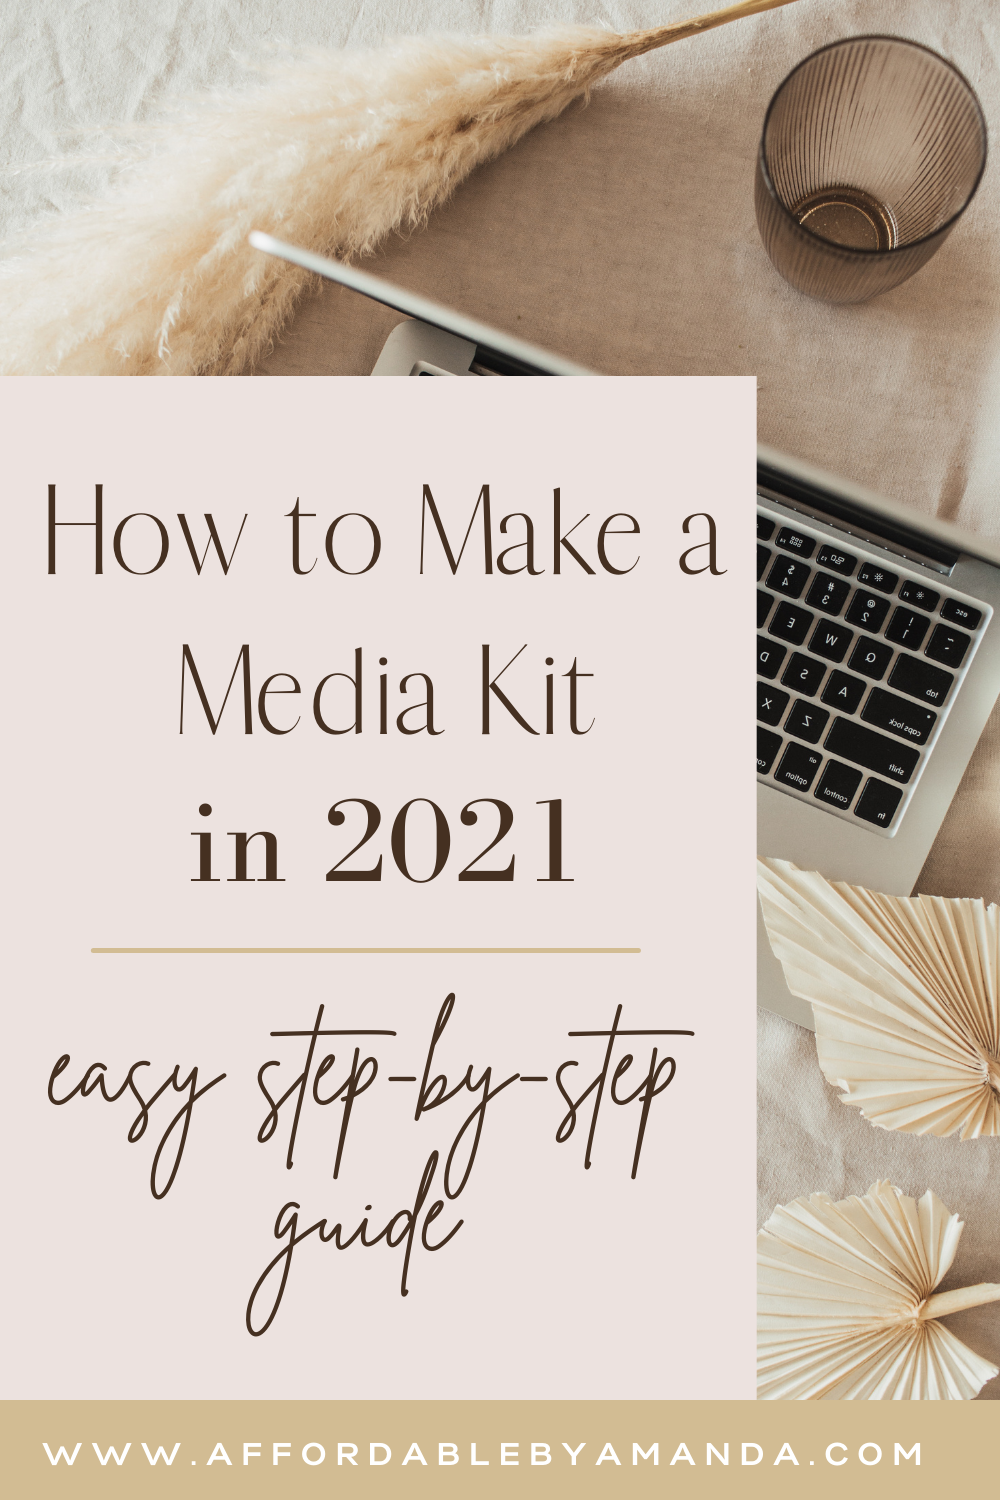 How to Make a Media Kit in 2021 | Affordable by Amanda